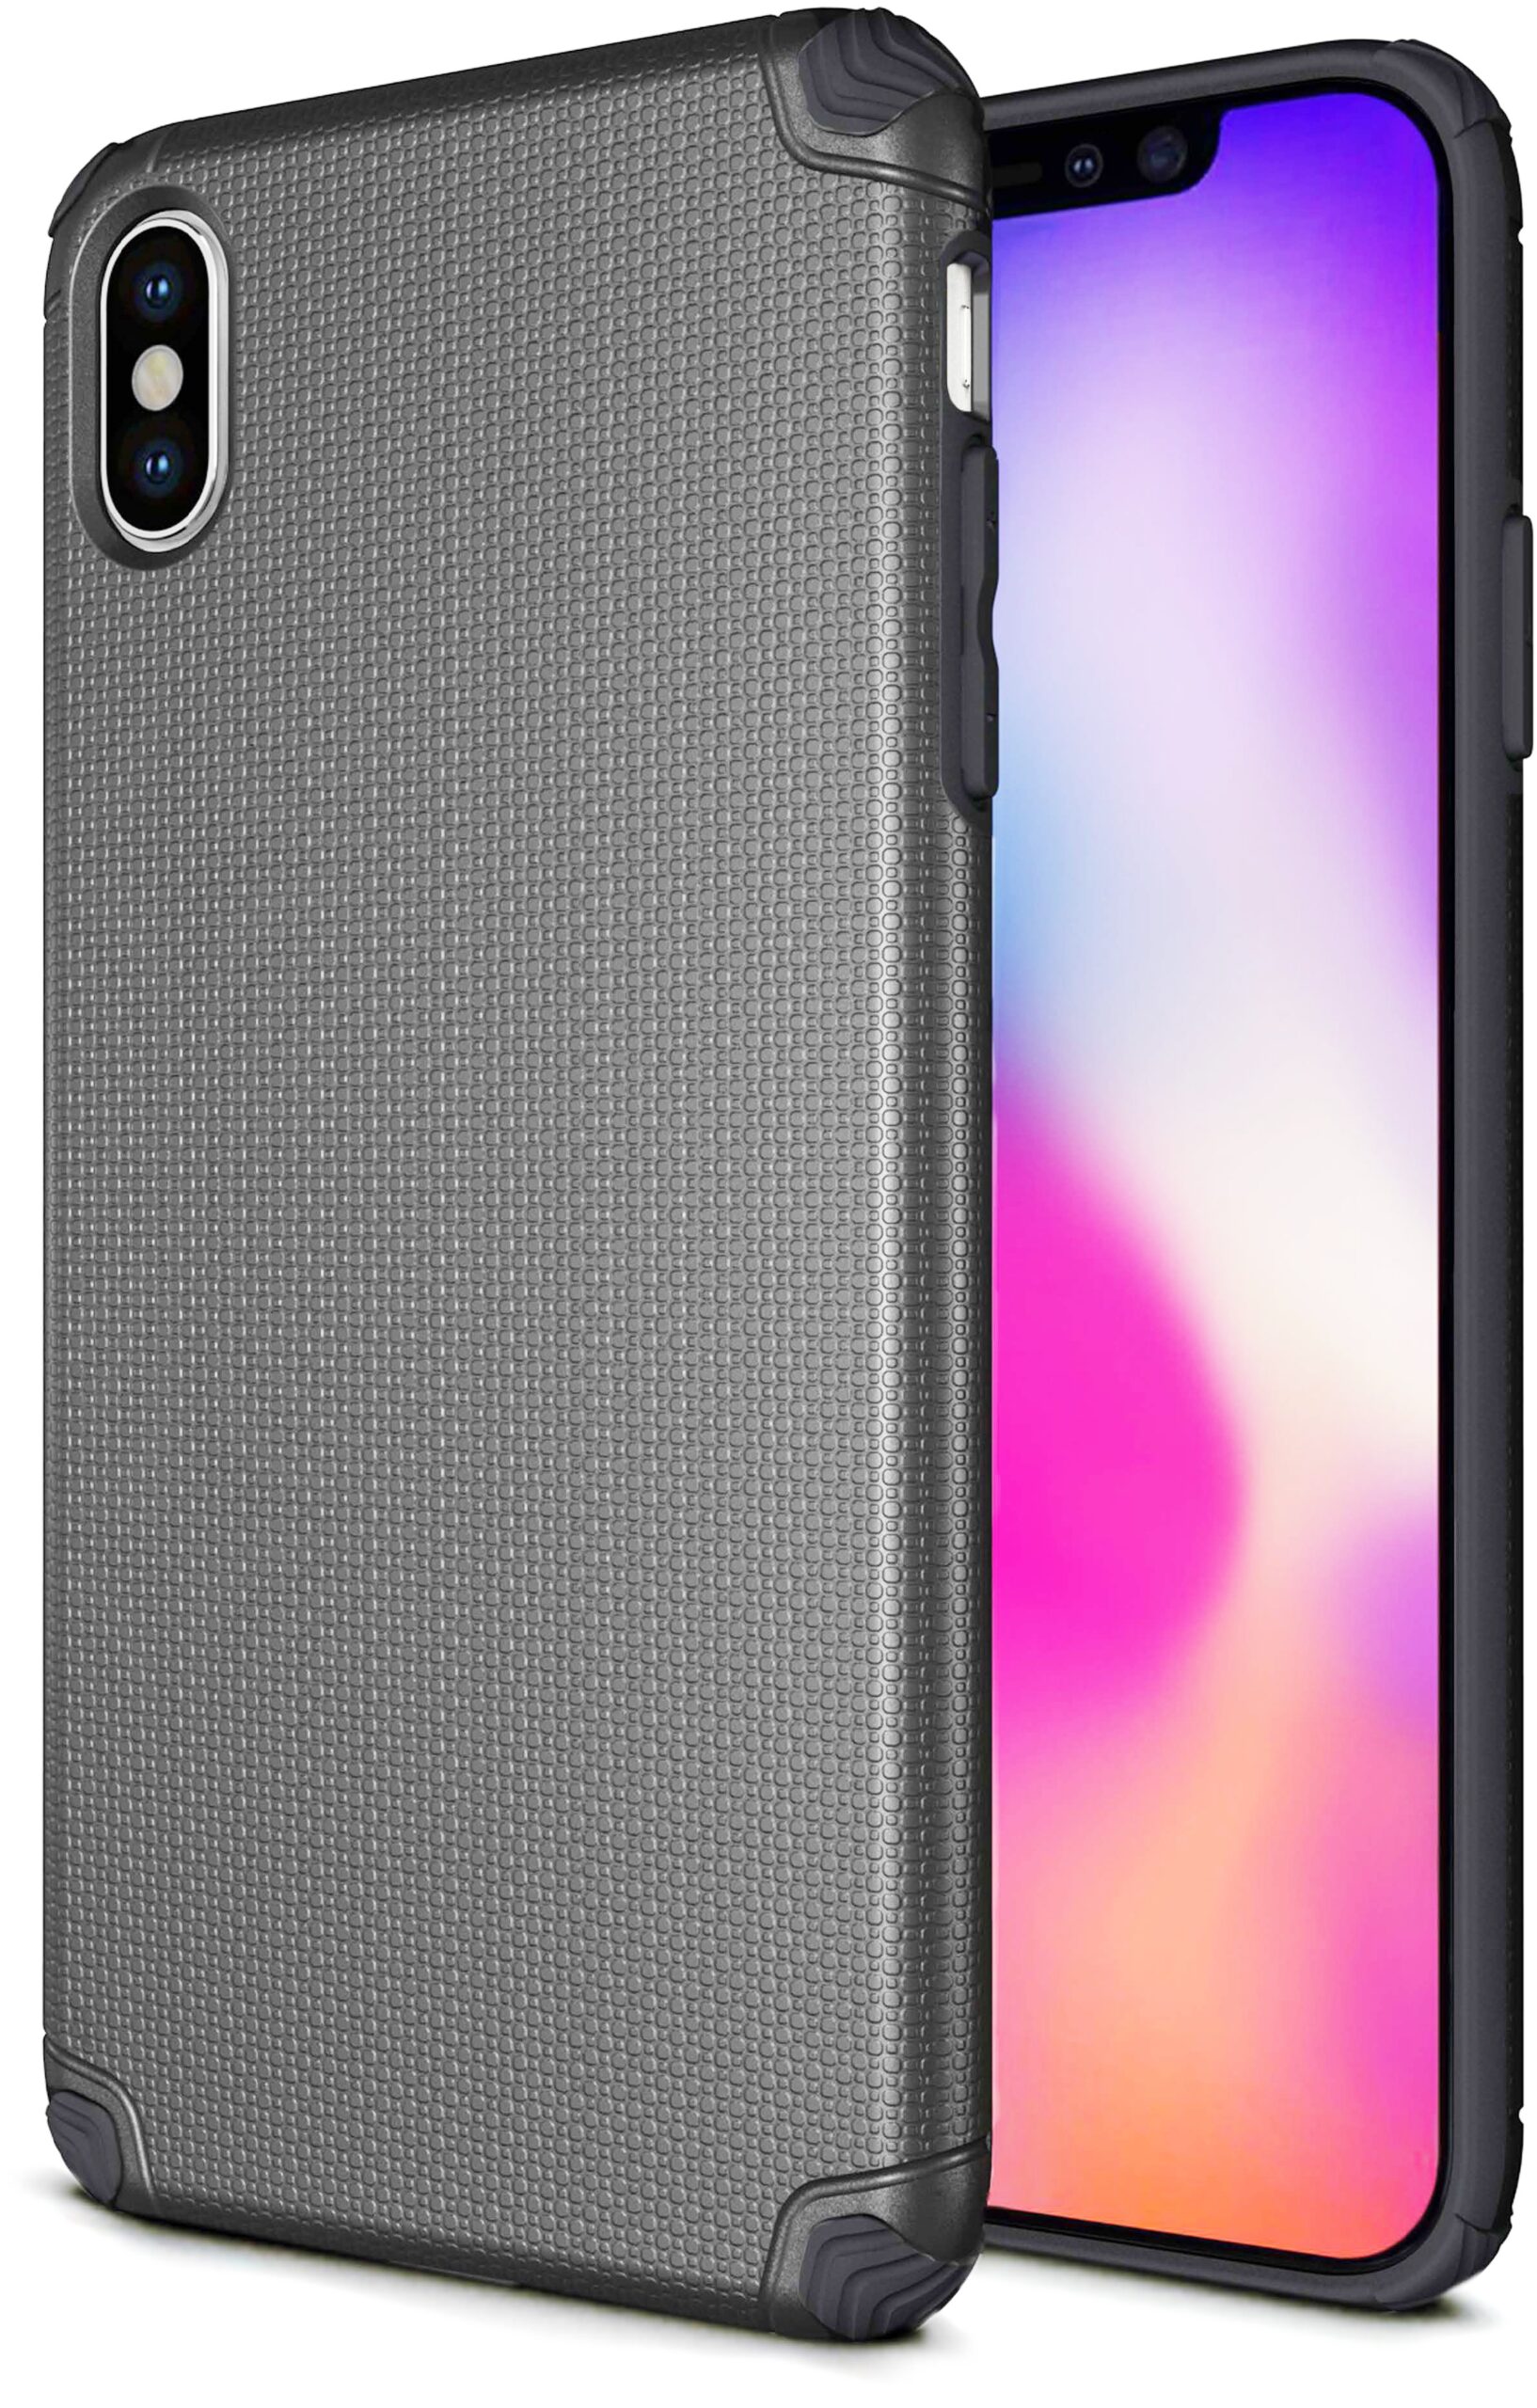 Base ProTech - Rugged Armor Protective Case for iPhone X Max - Grey